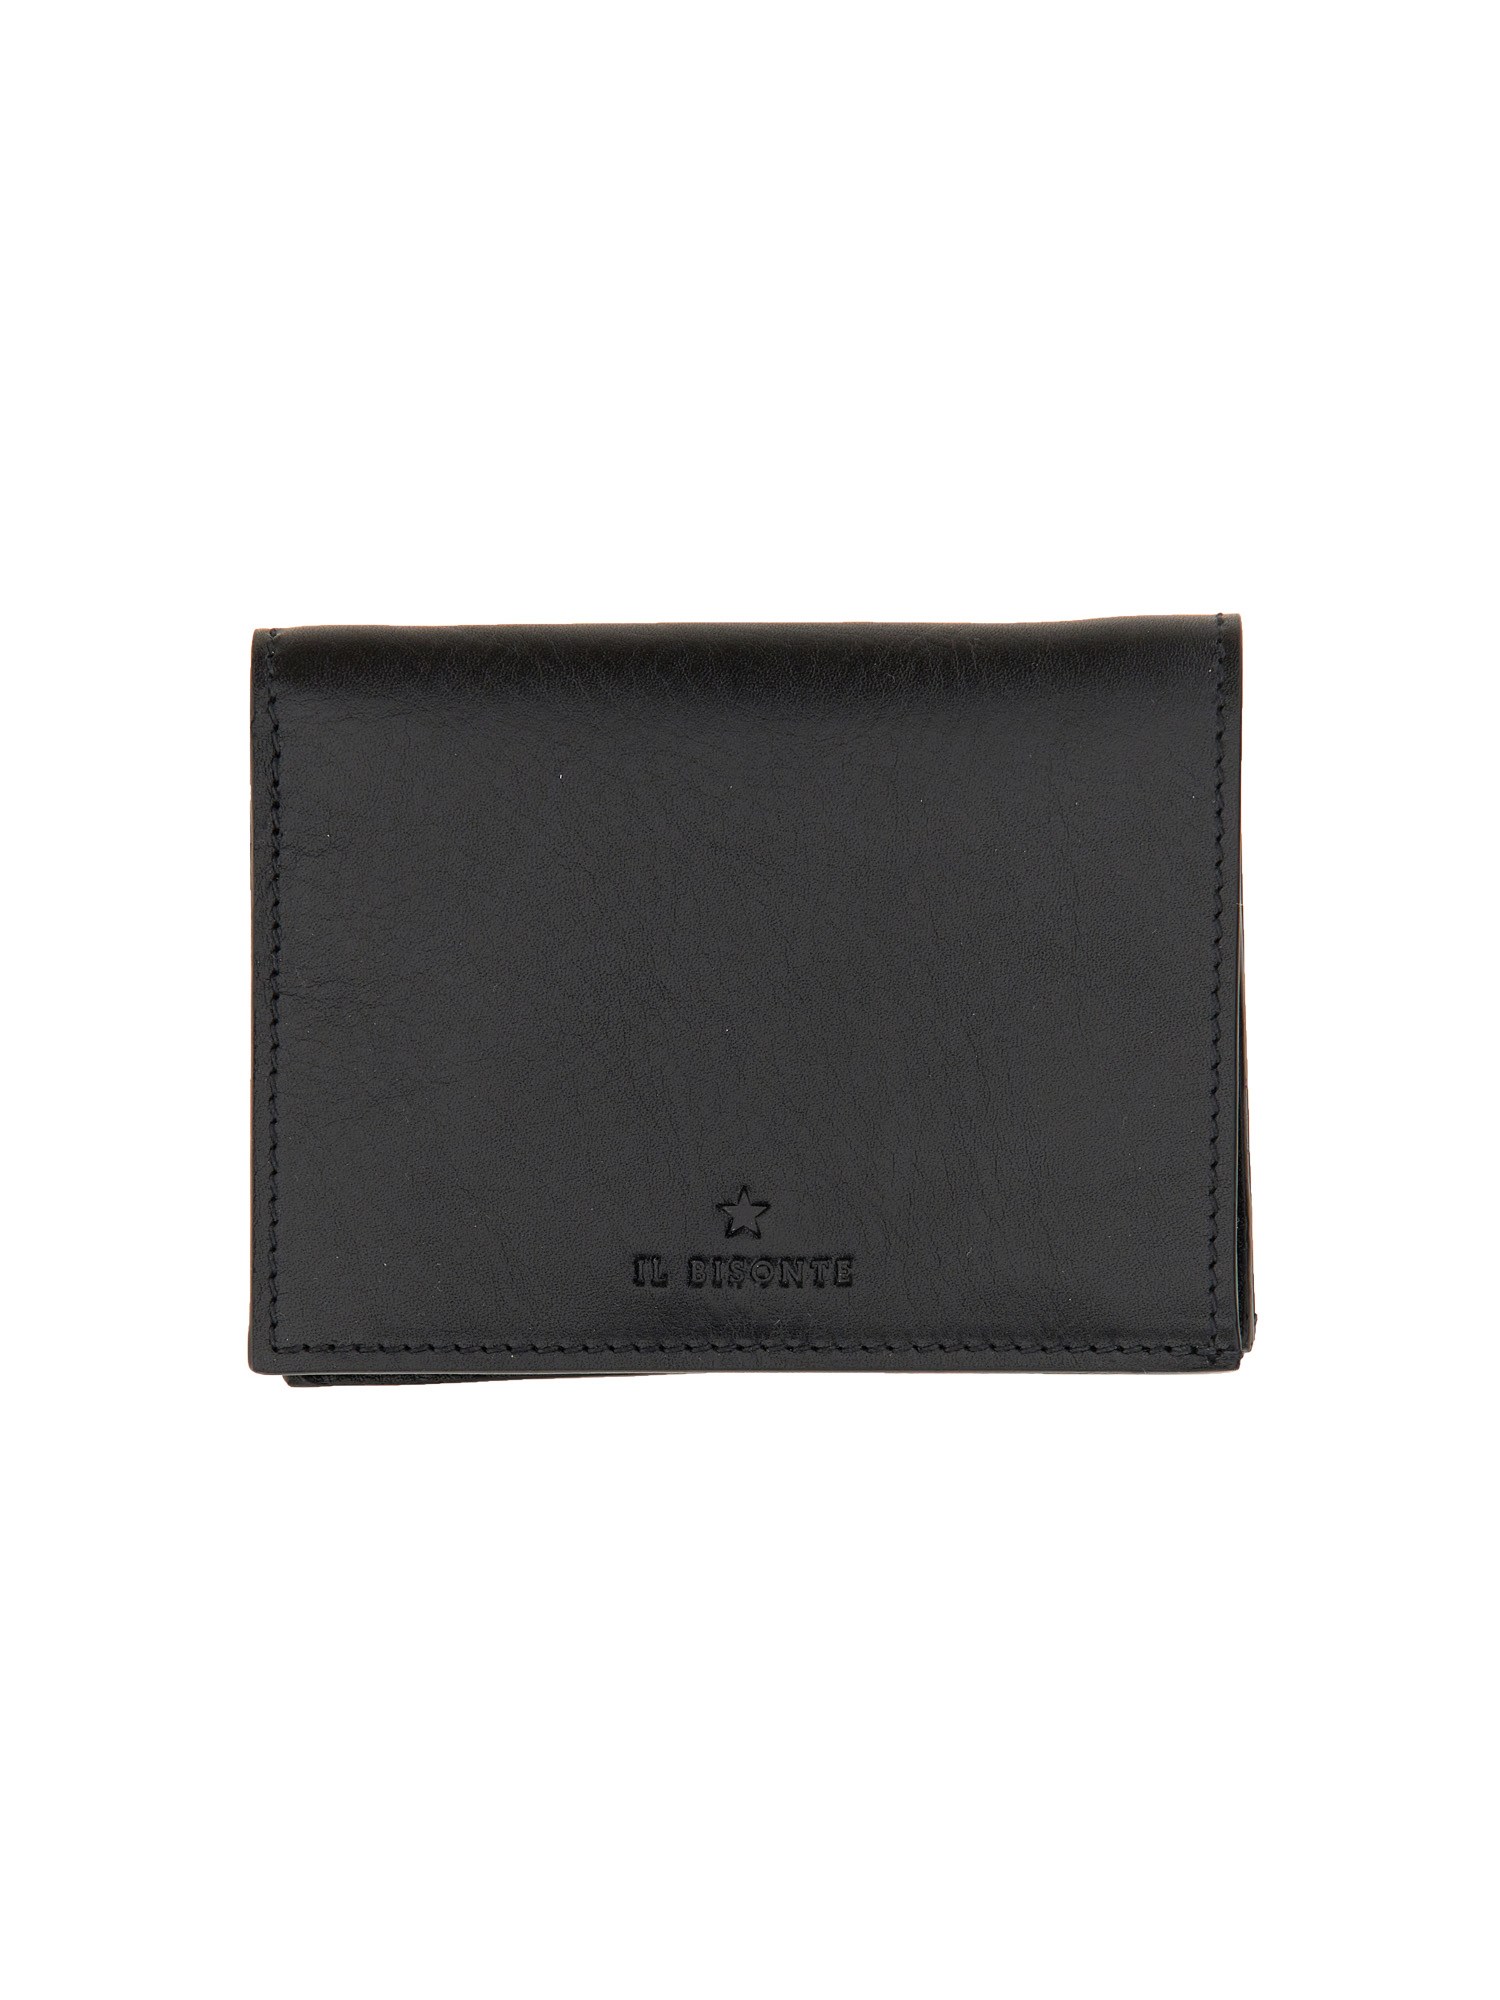 il bisonte small leather wallet